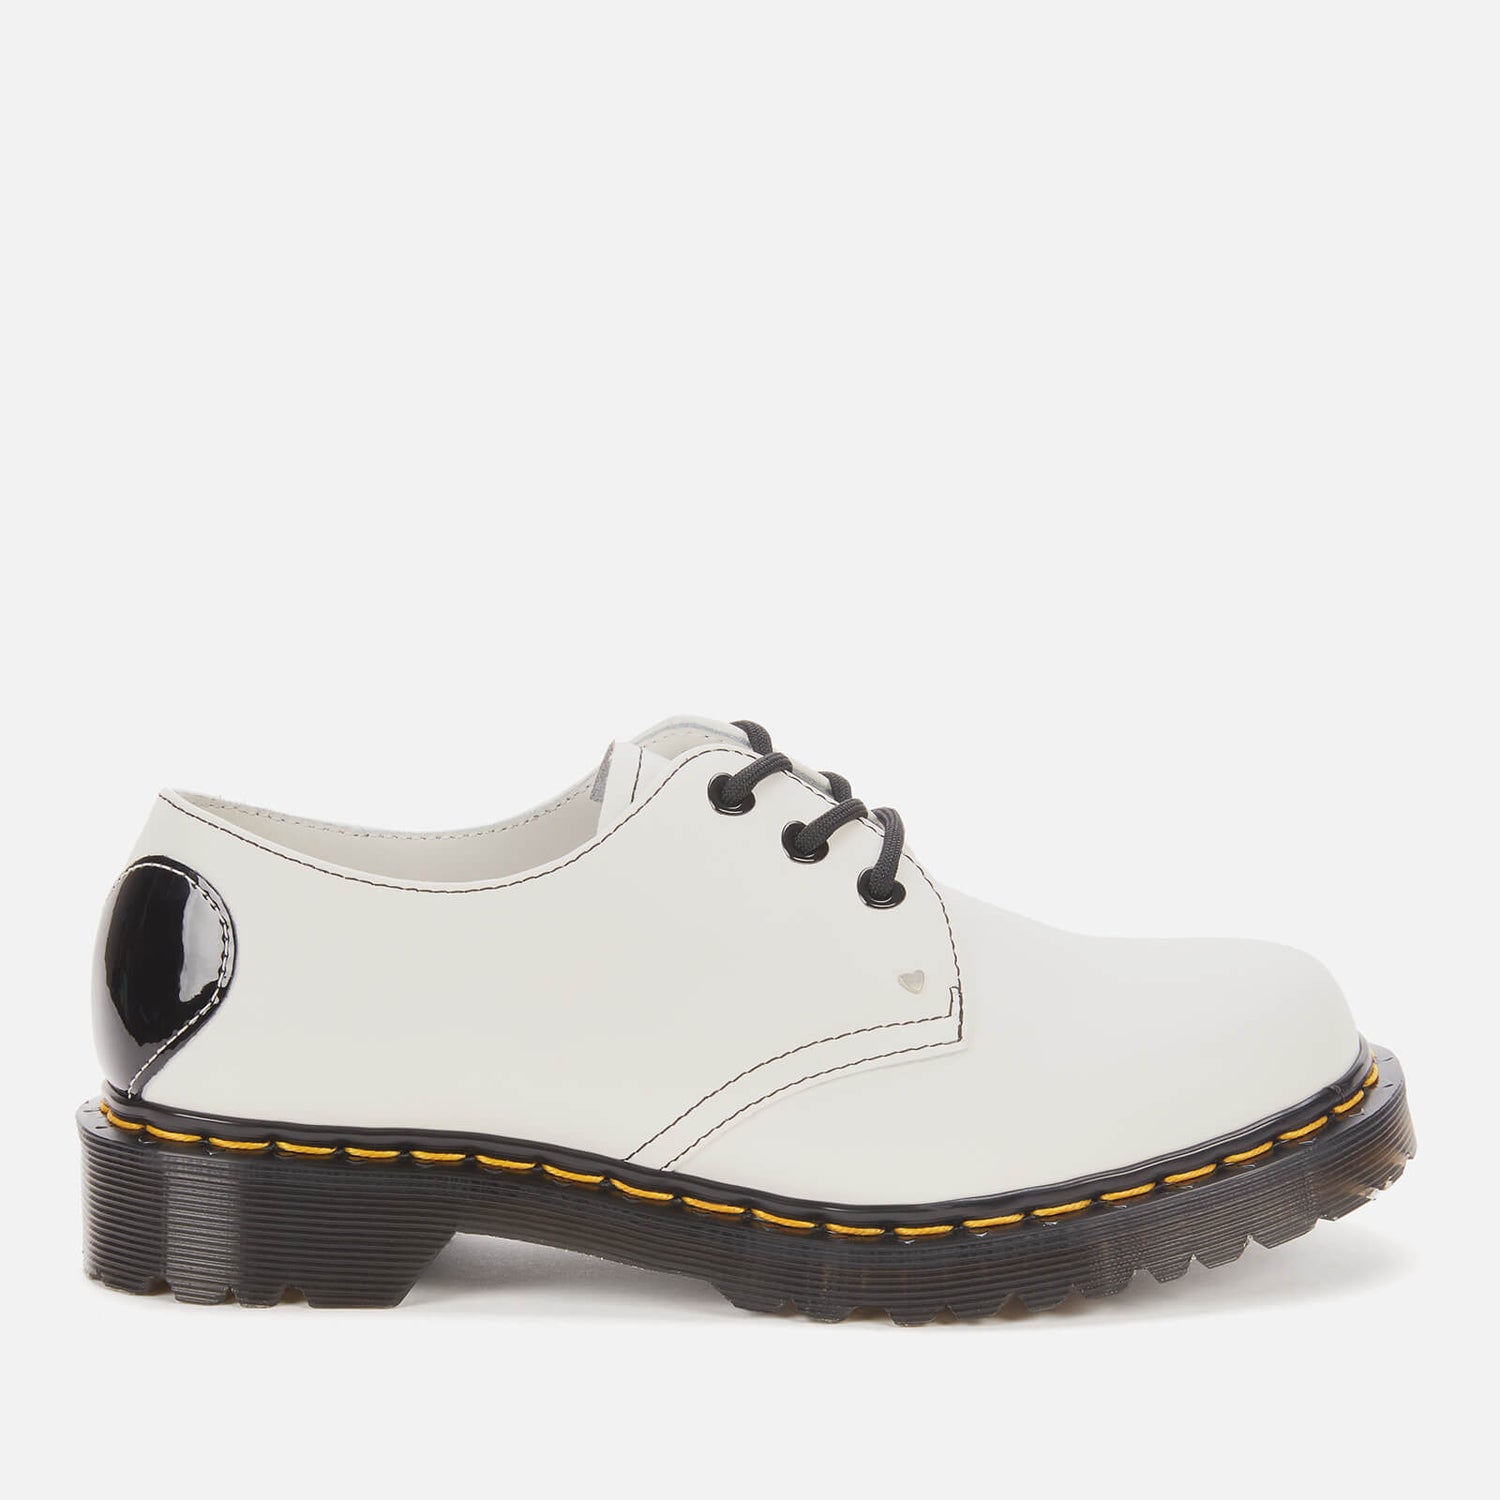 Dr. Martens Women's 1461 Hearts Smooth Leather 3-Eye Shoes - White